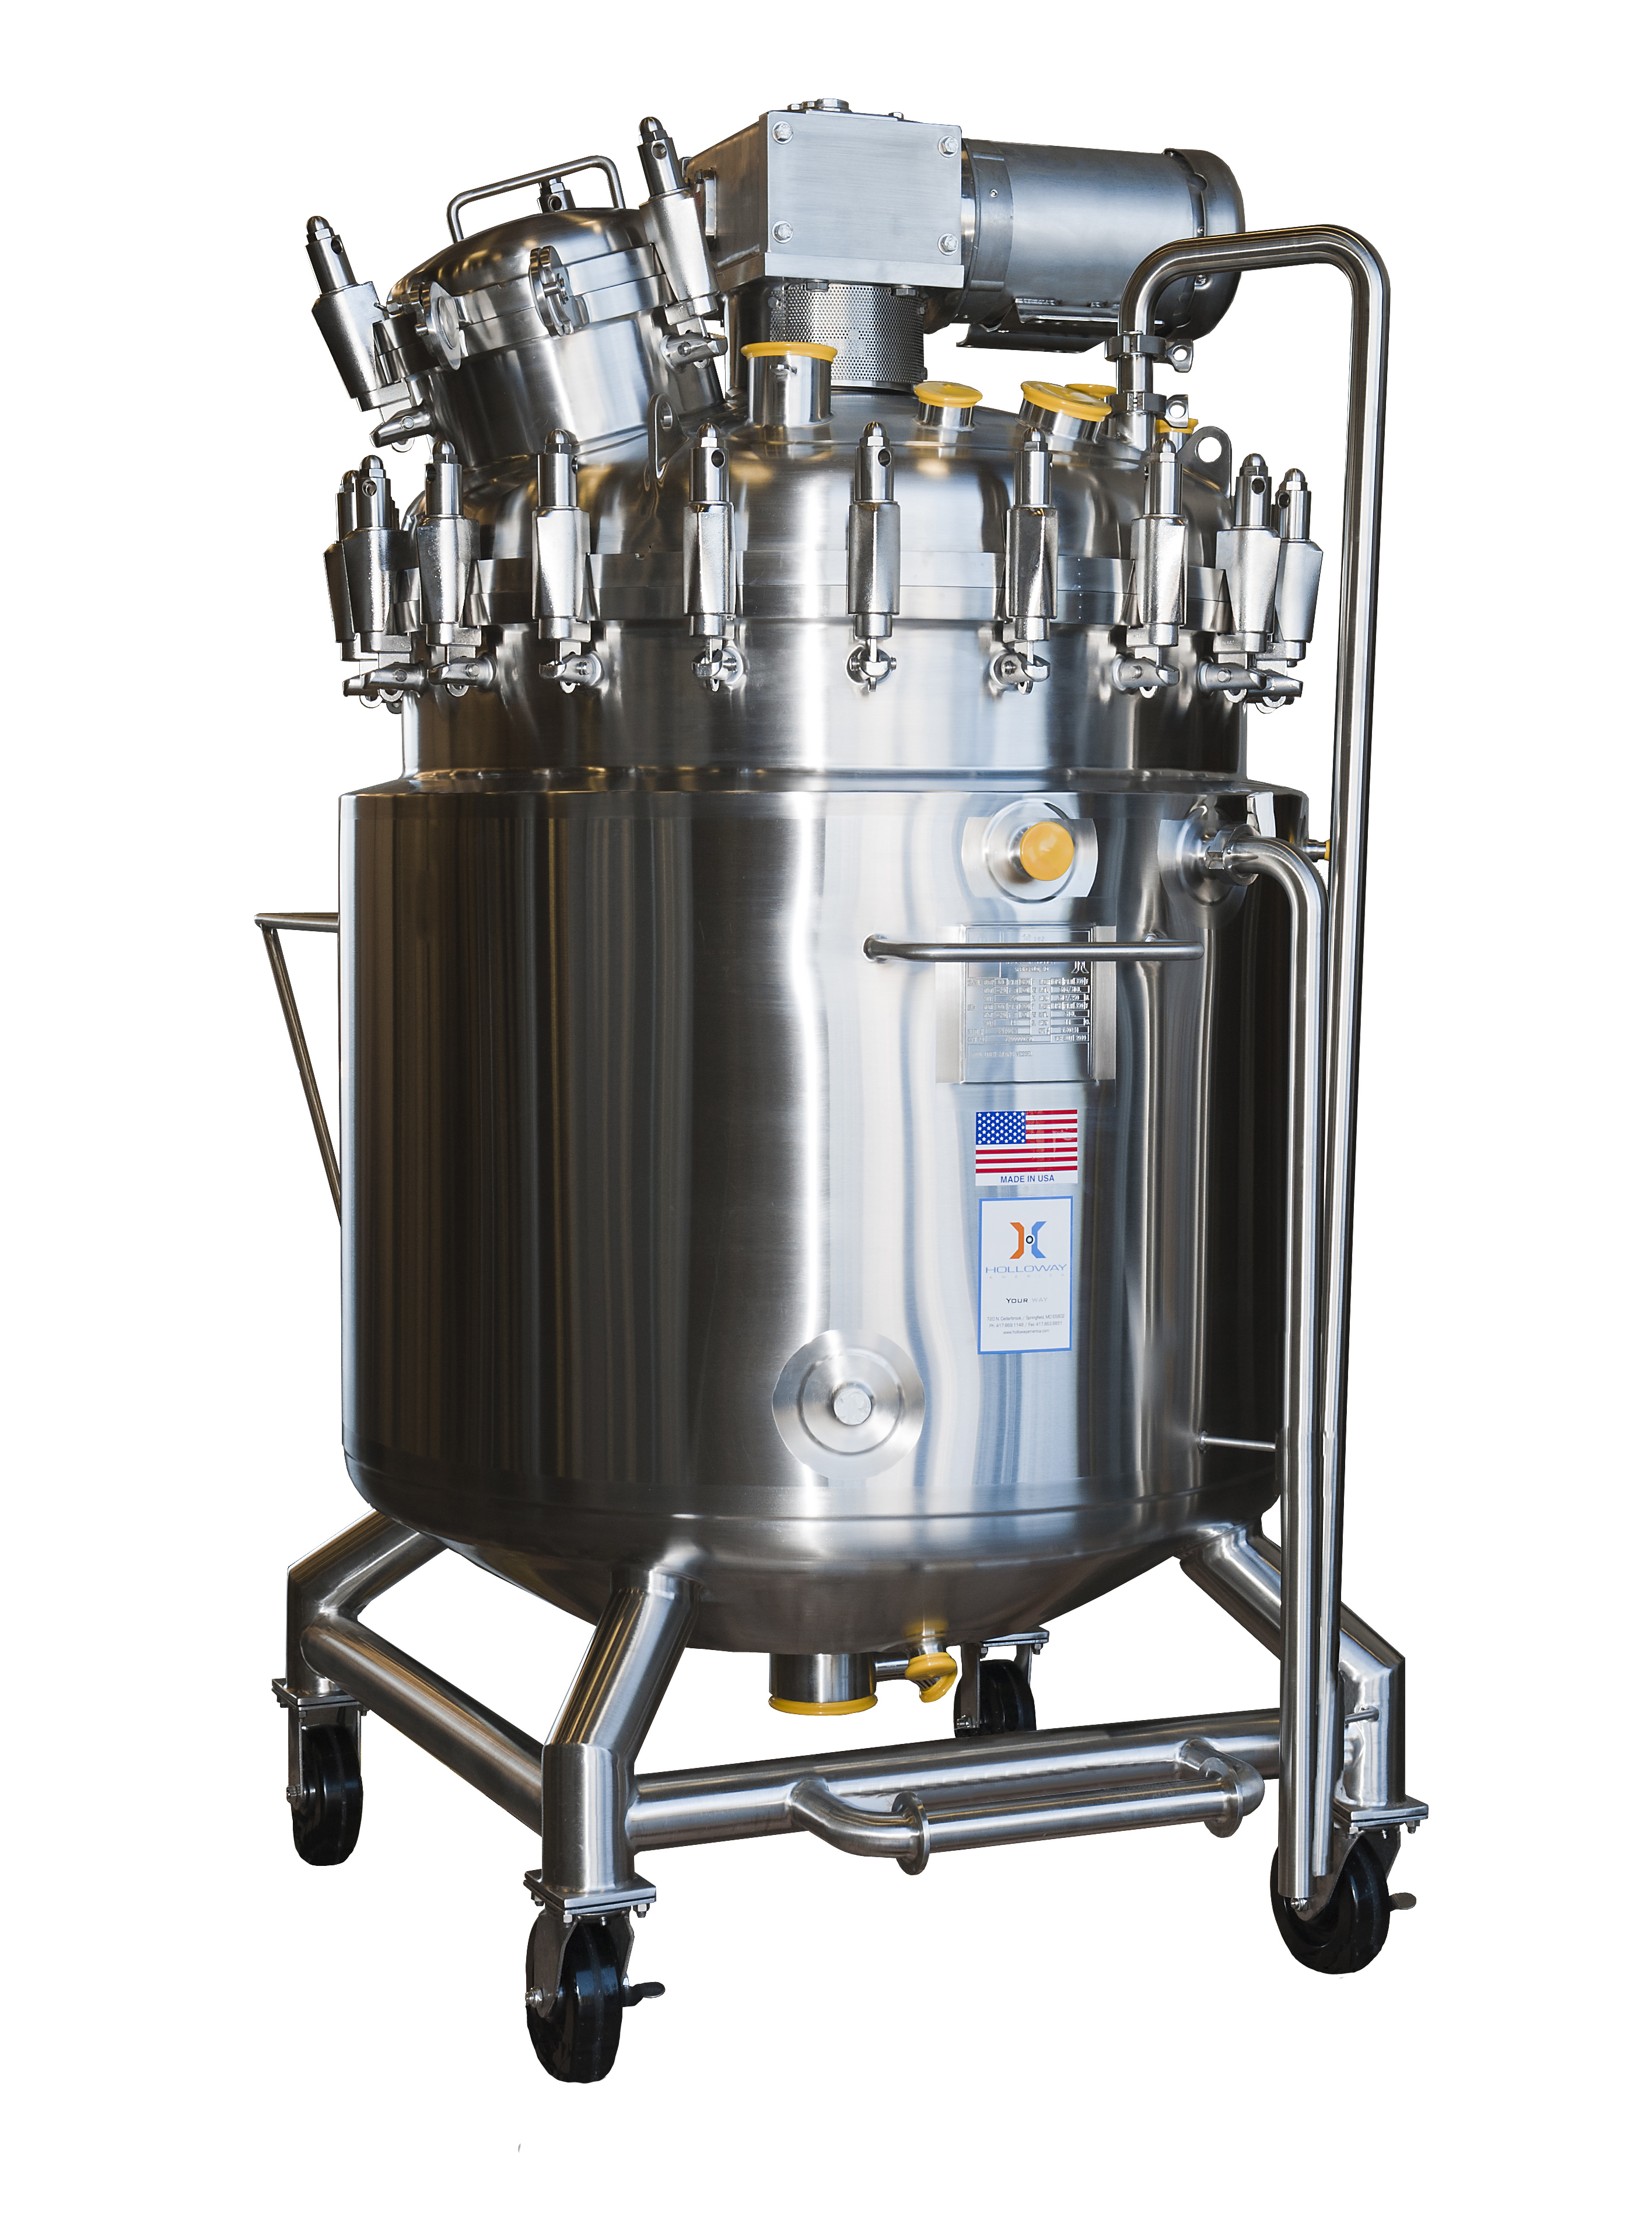 This photo shows a fermentation vessel built by HOLLOWAY AMERICA.